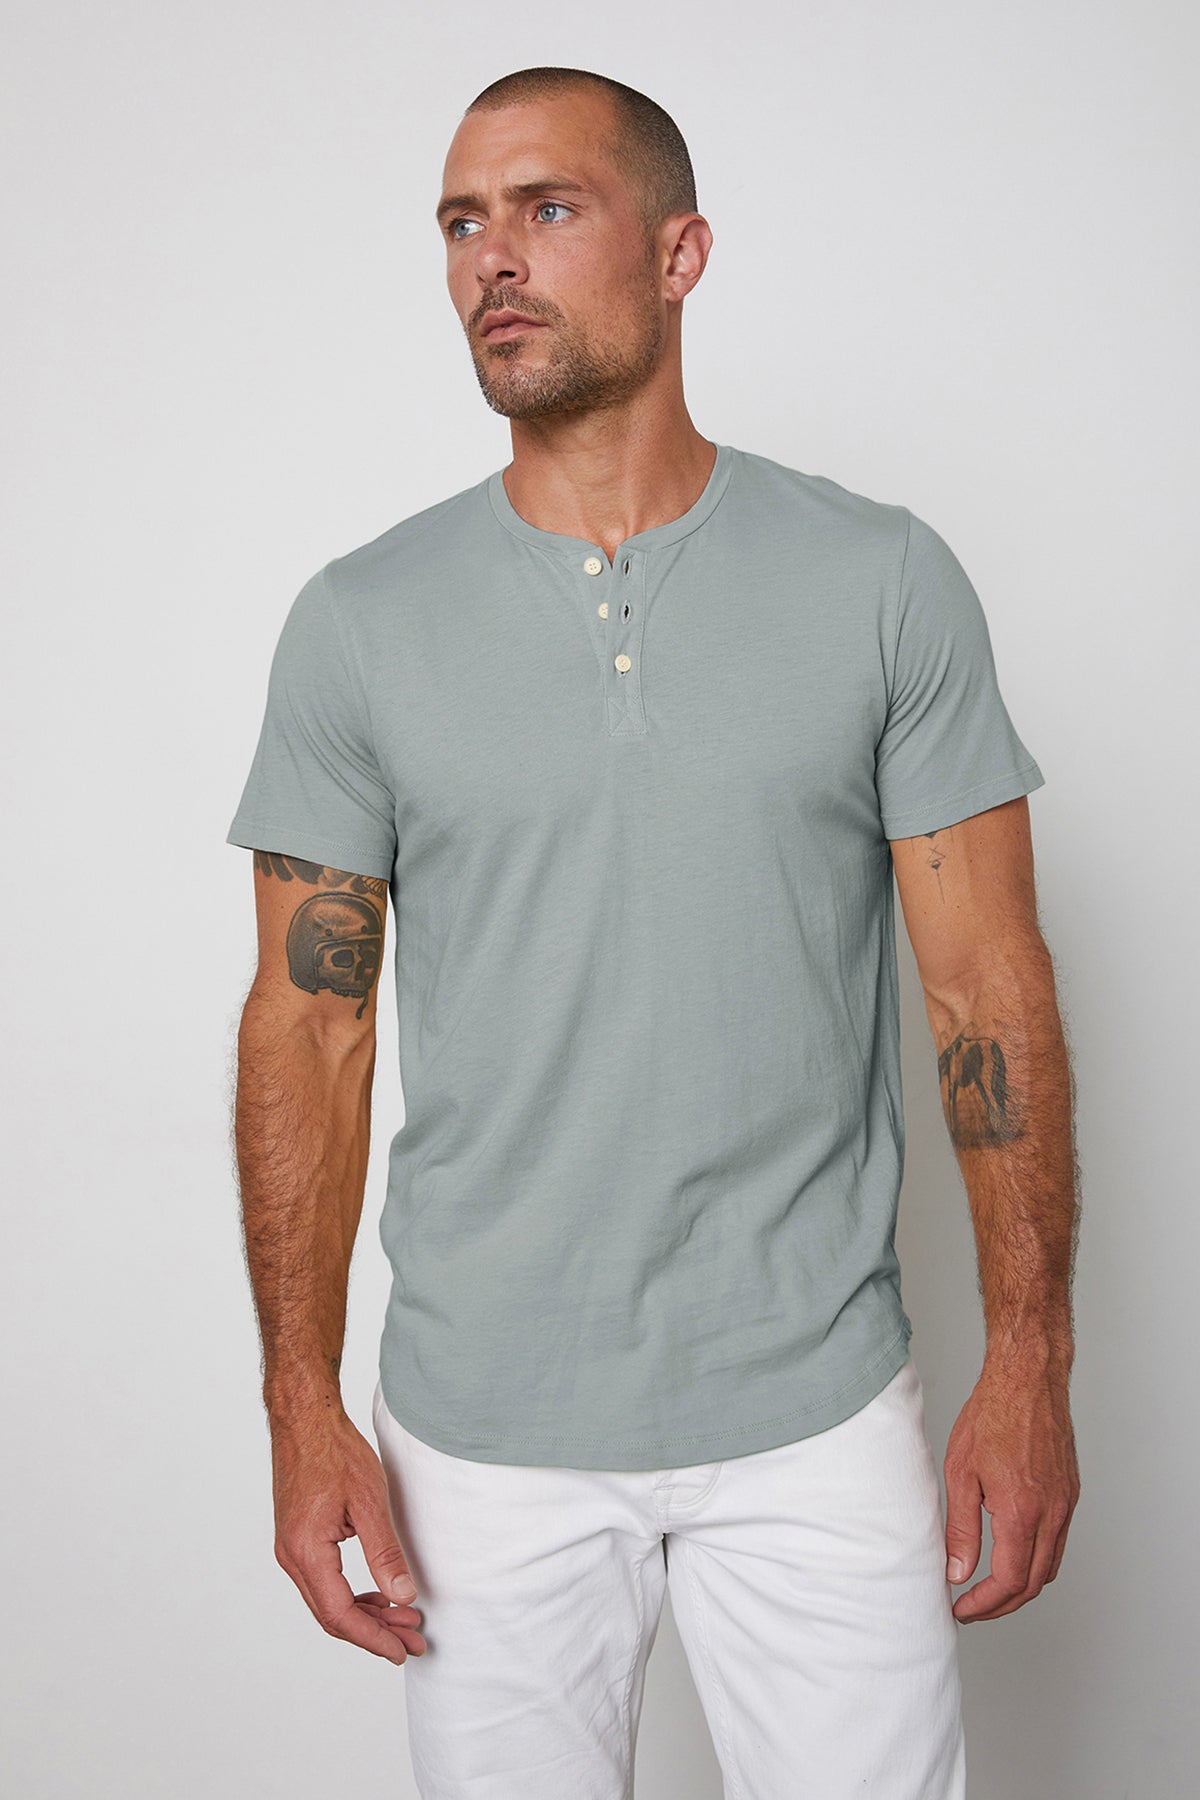   Fulton Short Sleeve Henley in ice blue with white denim front 